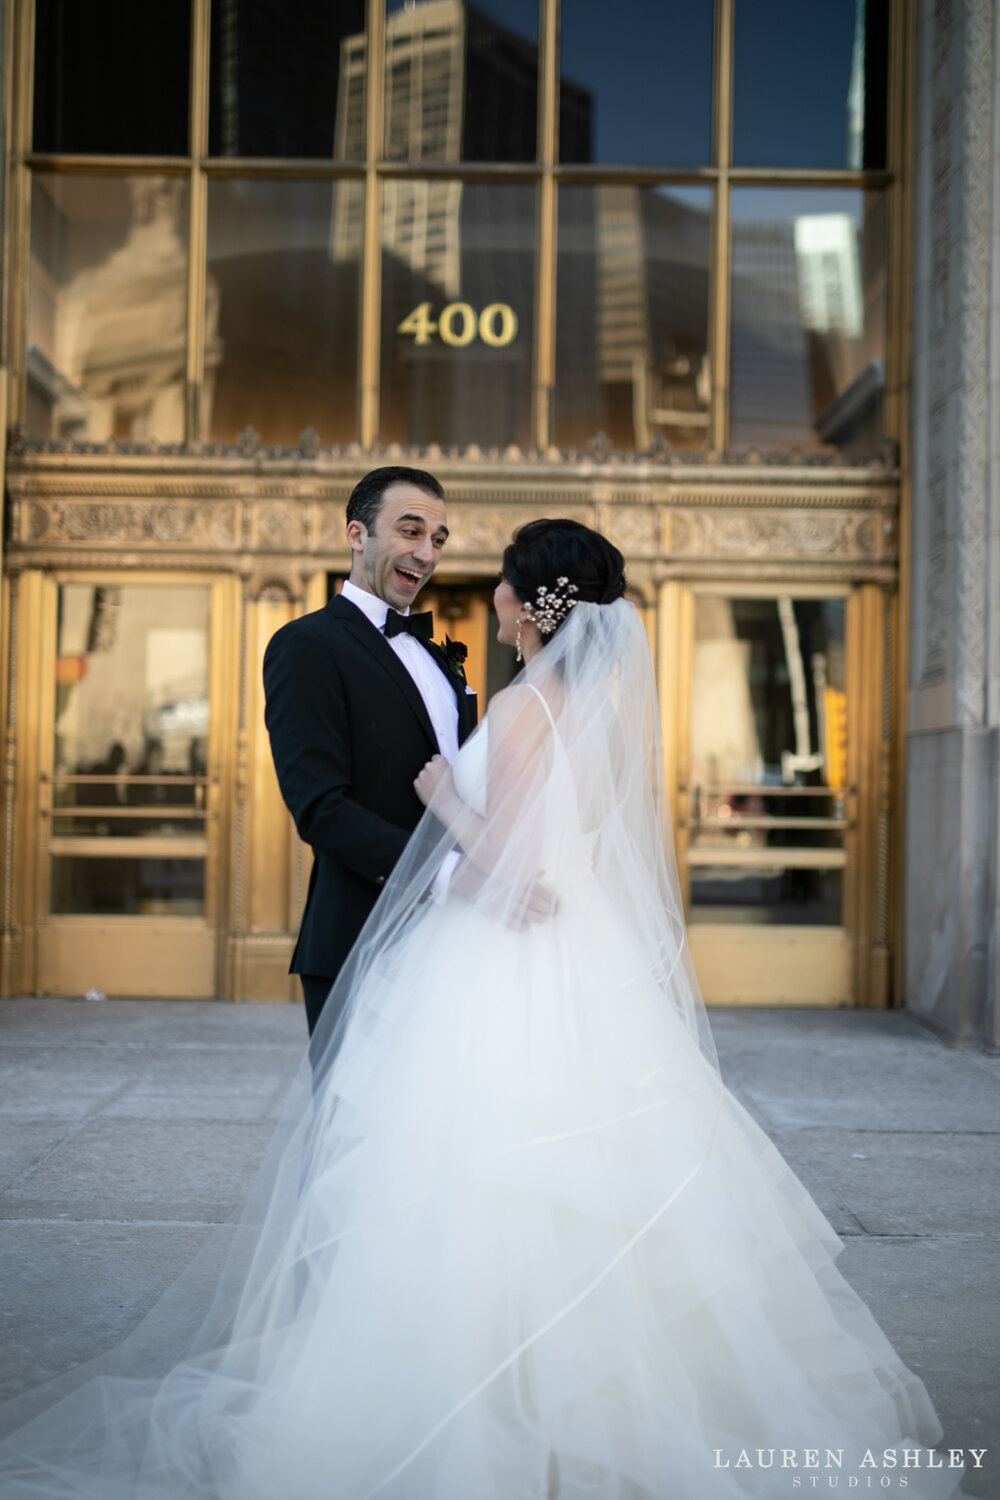 intercontinental-chicago-high-end-michigan-ave-magnificent-mile-wedding-chicago-wedding-photography-70.jpg